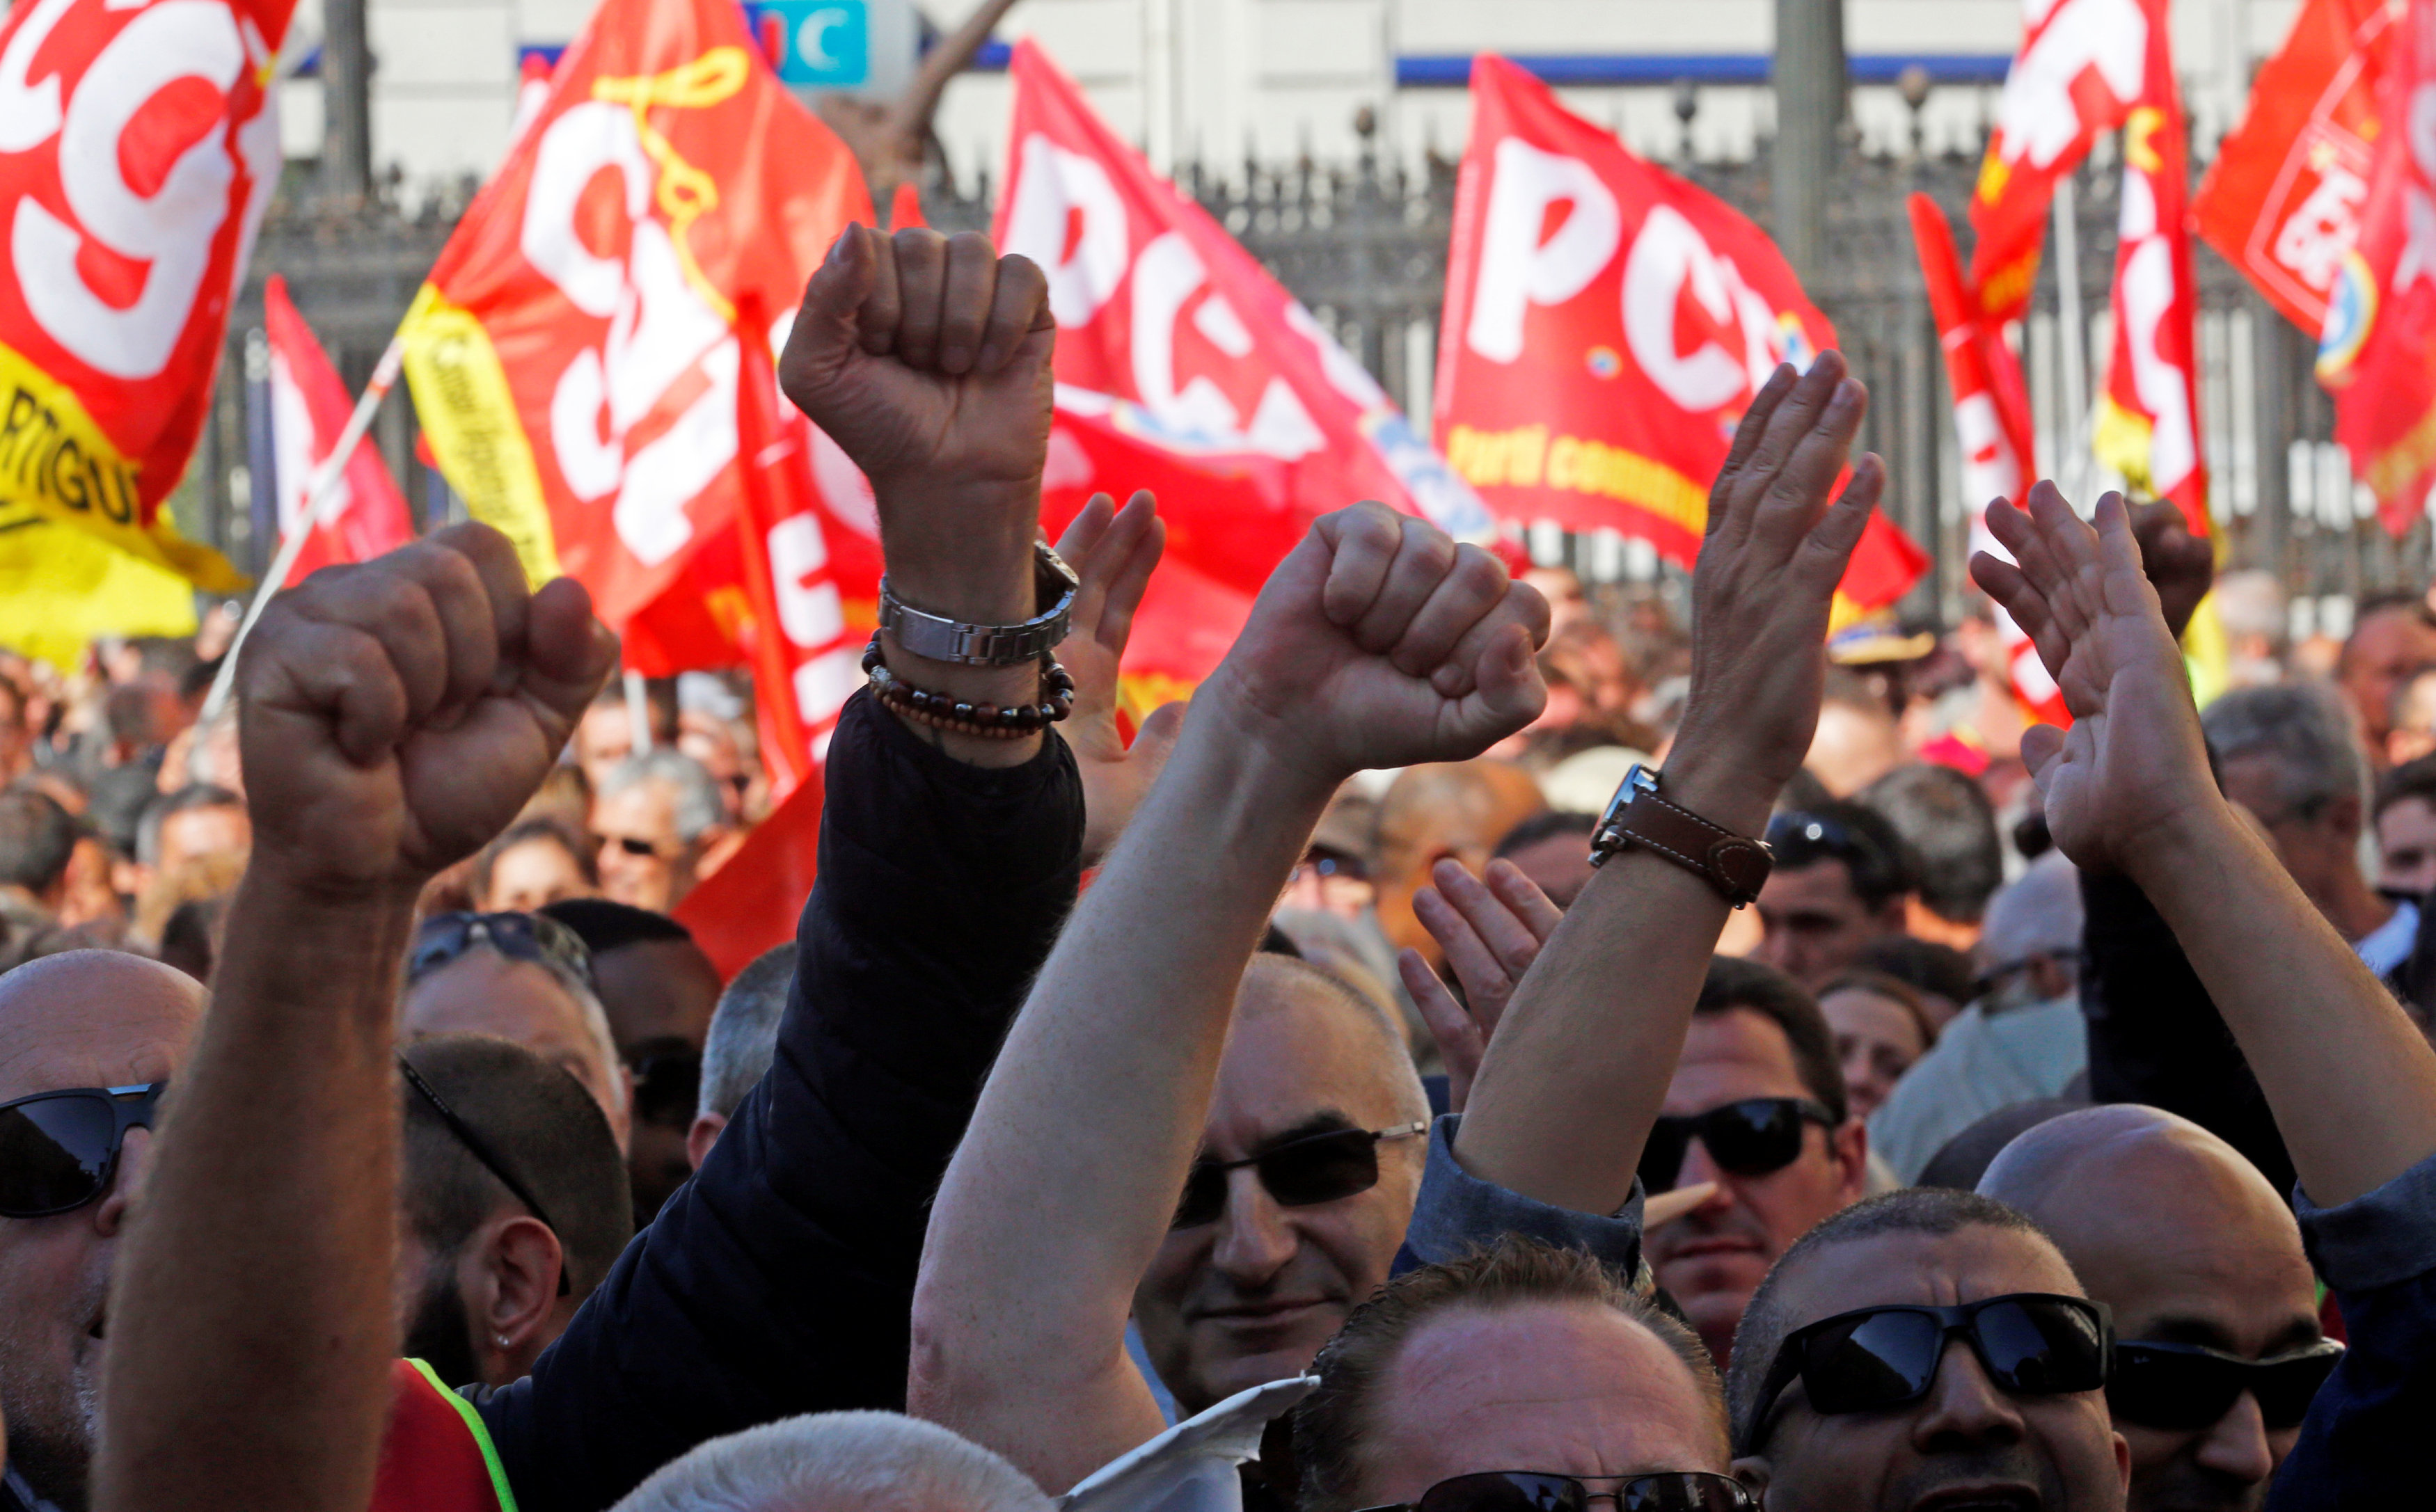 In pictures: Protest against labour reforms in French city of Marseille